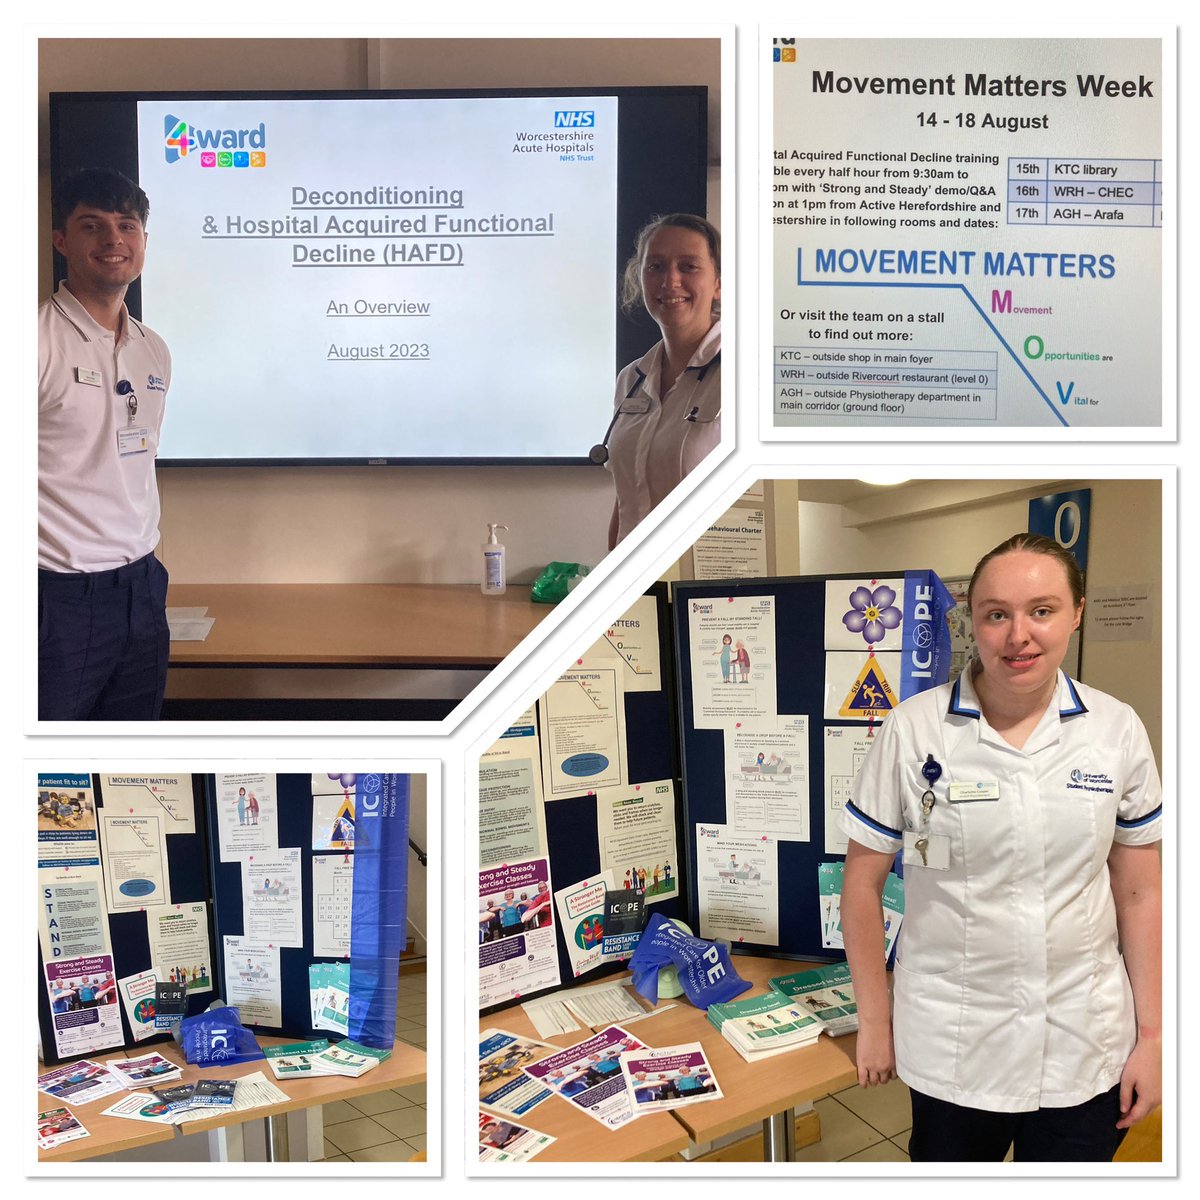 Big shout out to Physio Students Dan & Charlotte @uworcphysio. Helping the team educate about HAFD and keeping patients active. Teaching delivered and stand covered. Great work 👏🏻 @WorcsAcuteNHS @WAHT_Physio